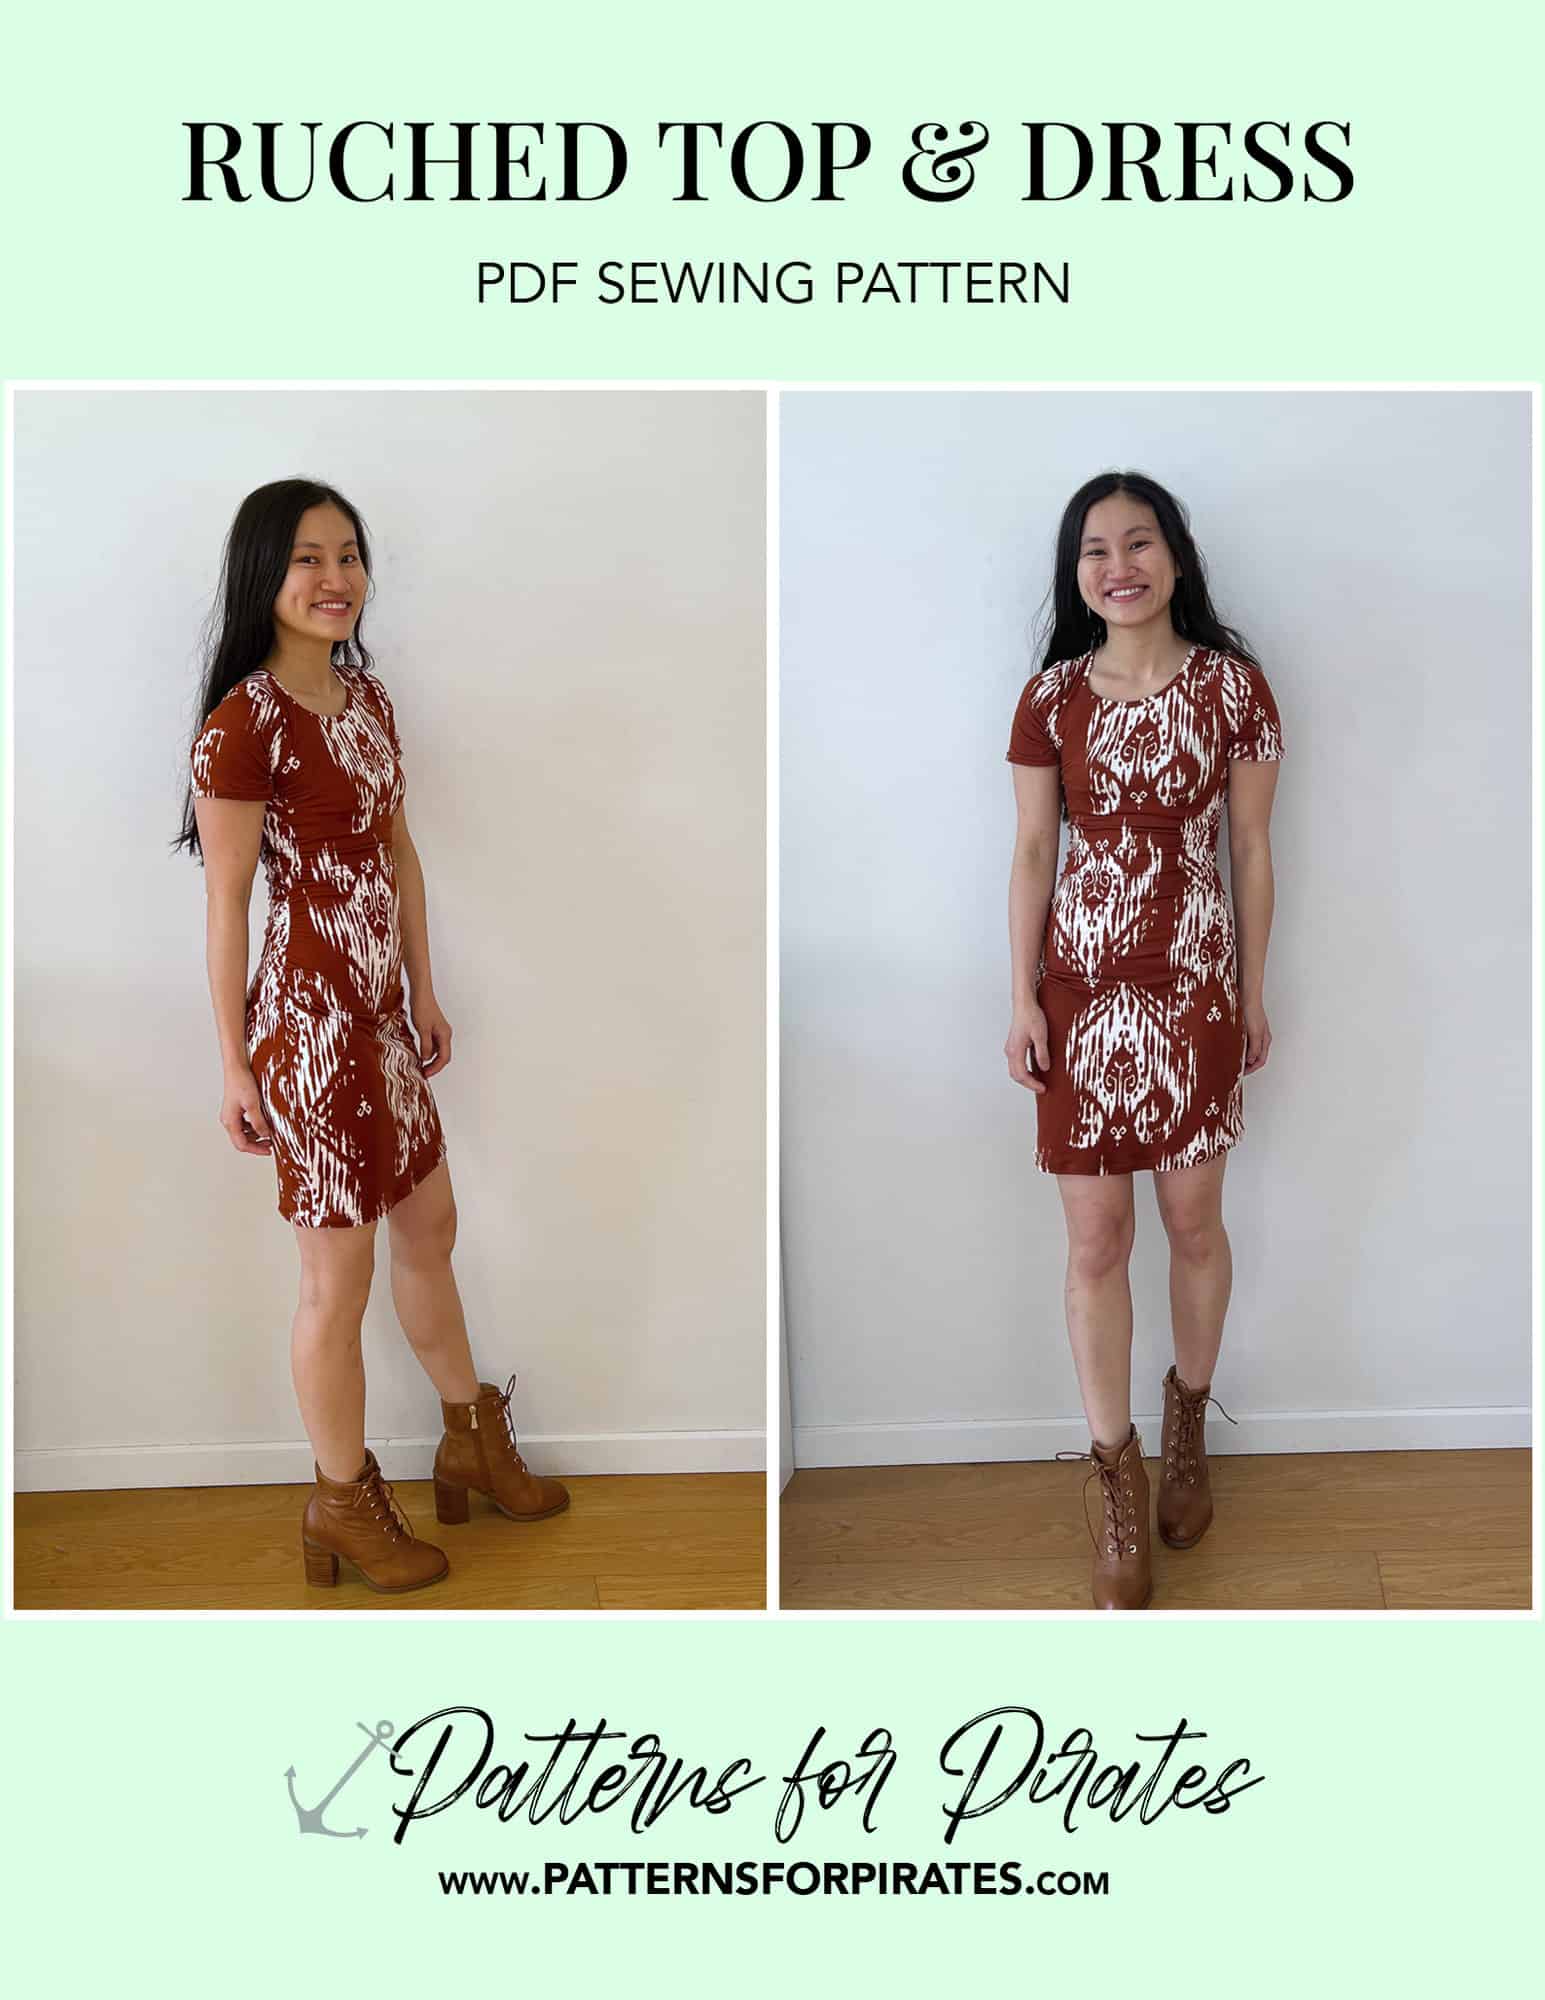 Ruched Top & Dress - Patterns for Pirates